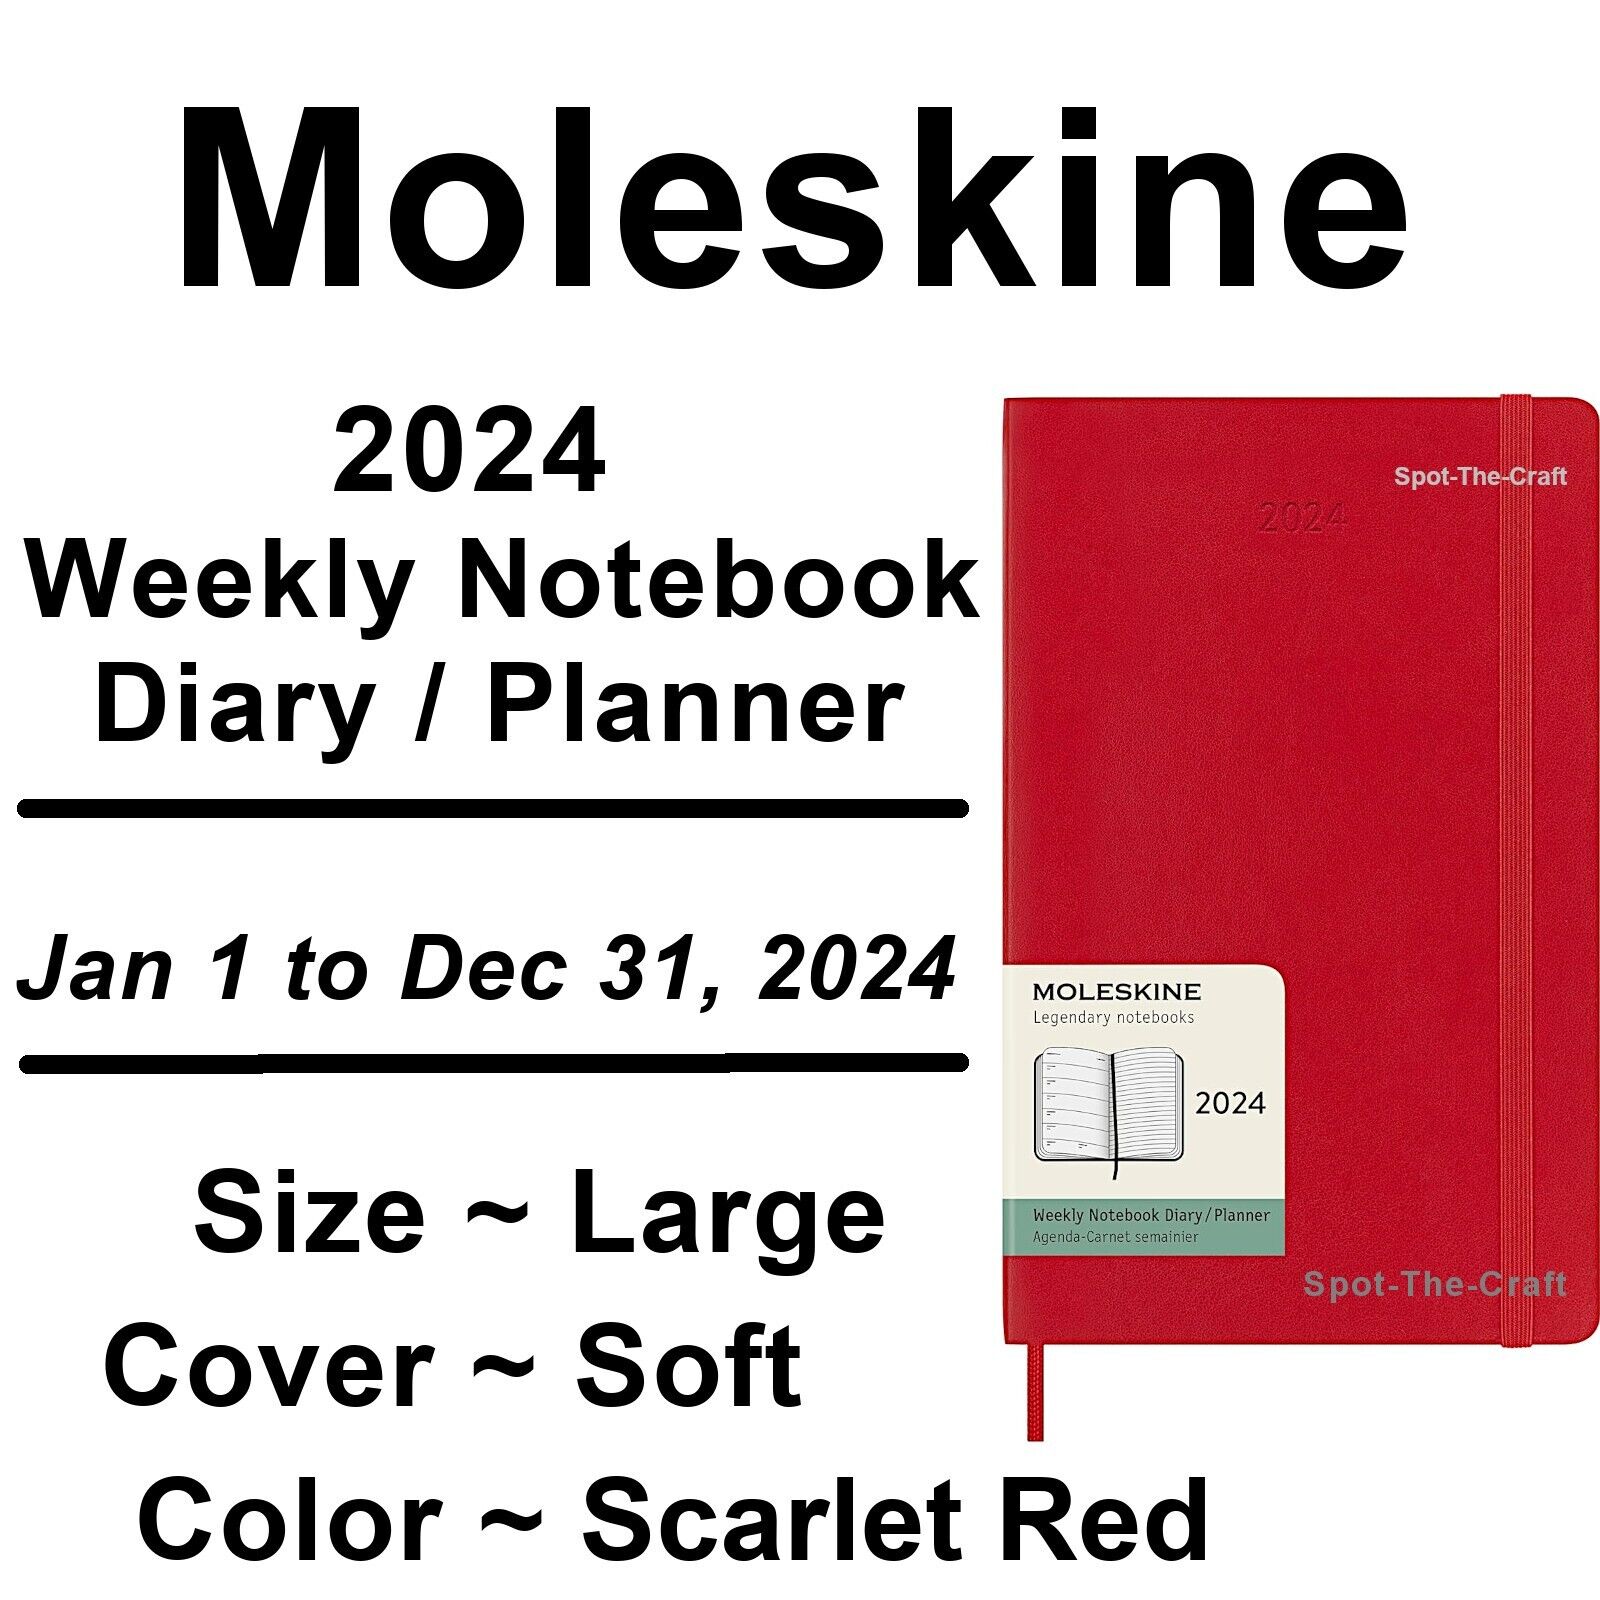 Moleskine 2024 Weekly Notebook Planner Large Soft Cover Scarlet Red for